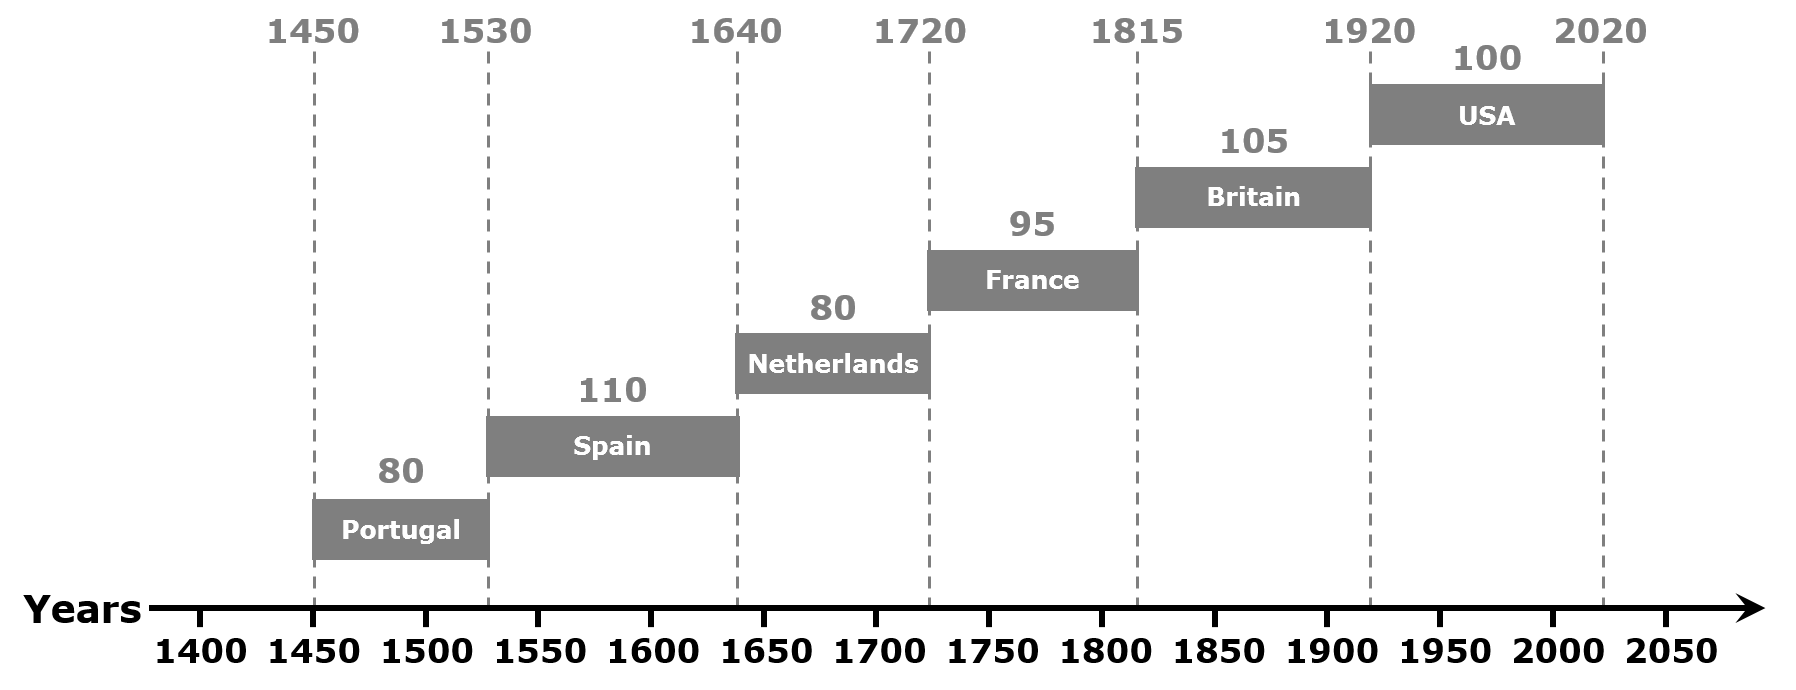 History of World Trade Currencies